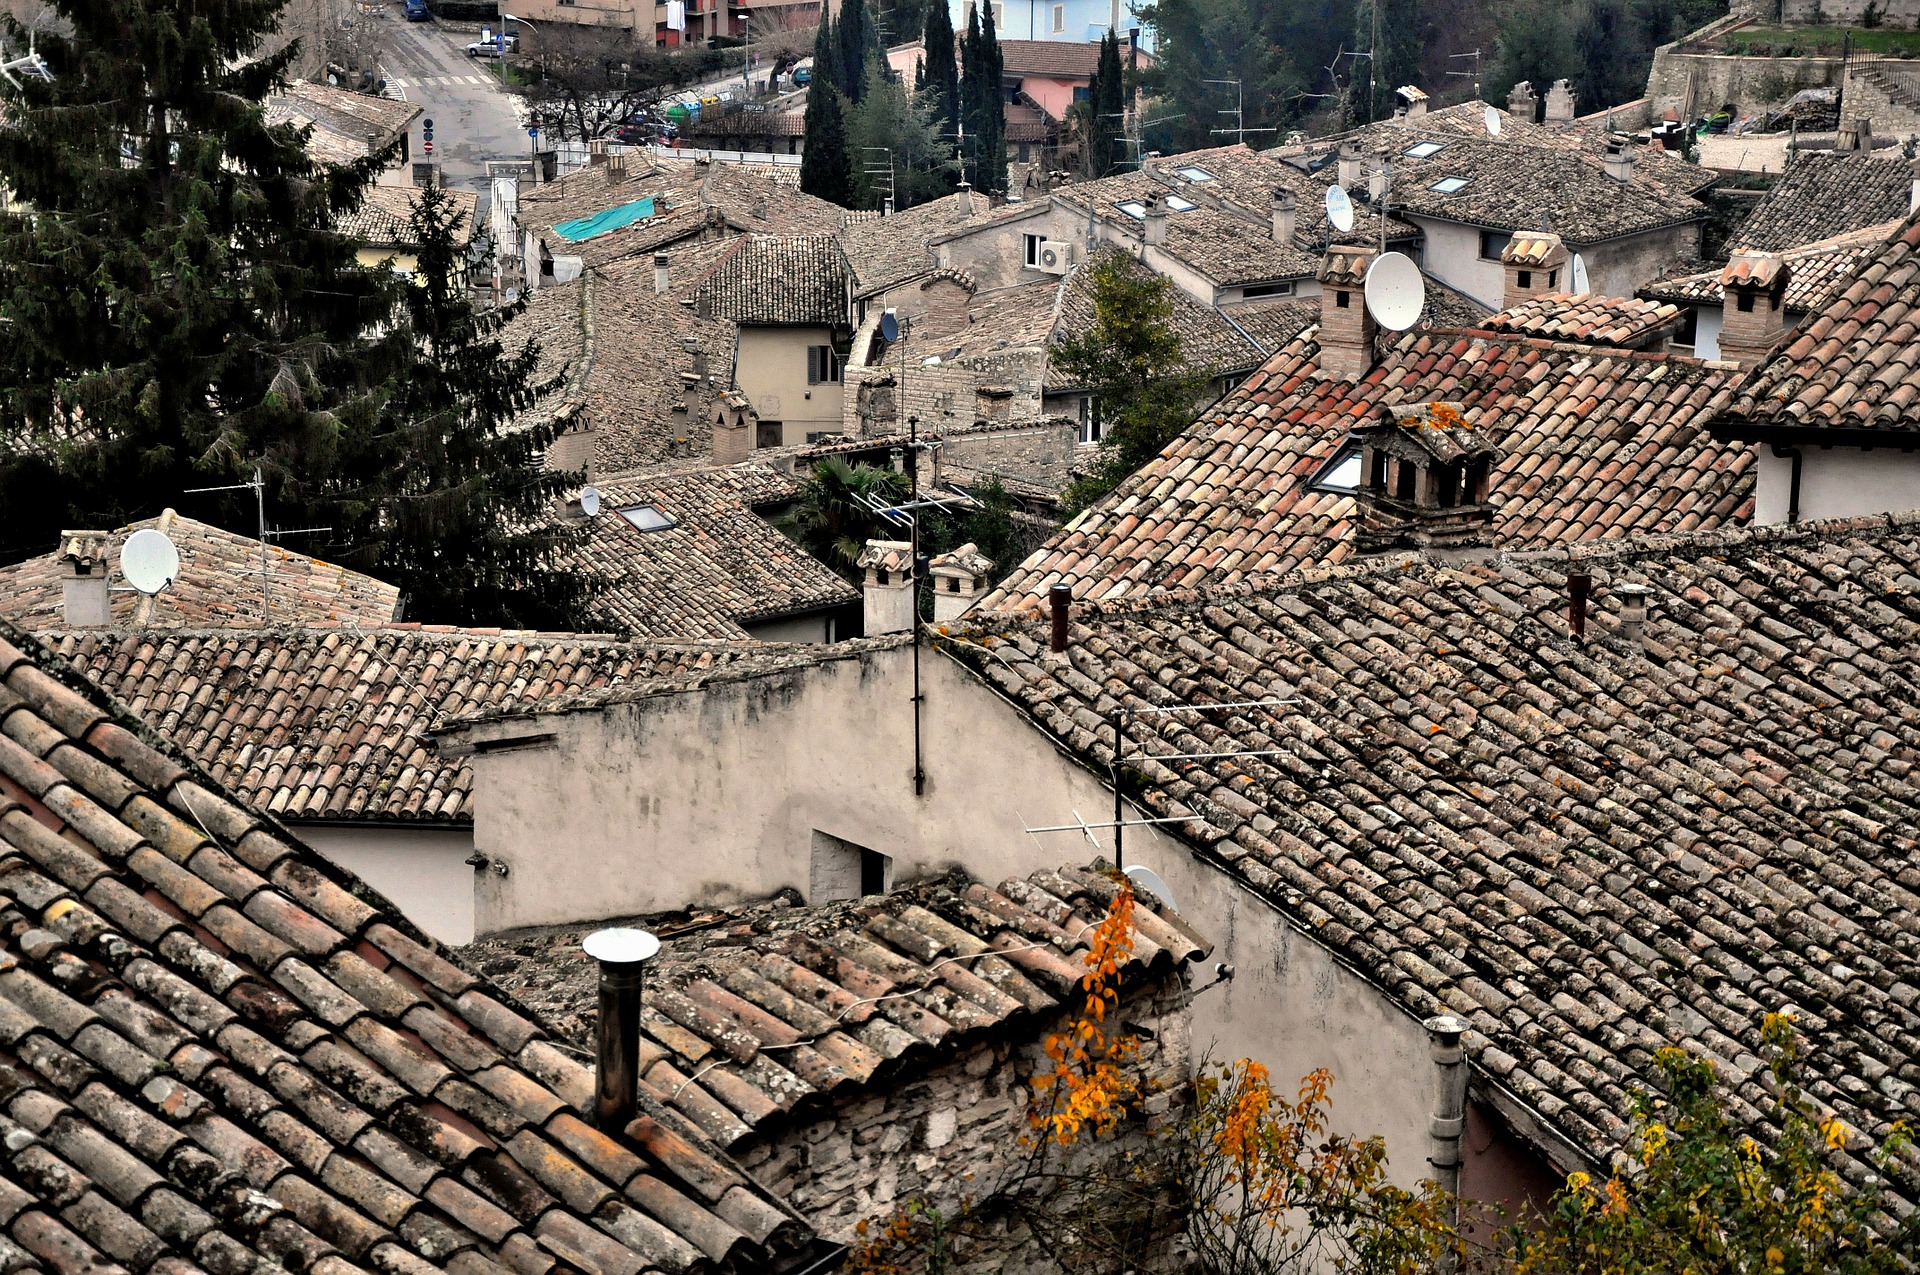 The town of Spoleto in Umbria